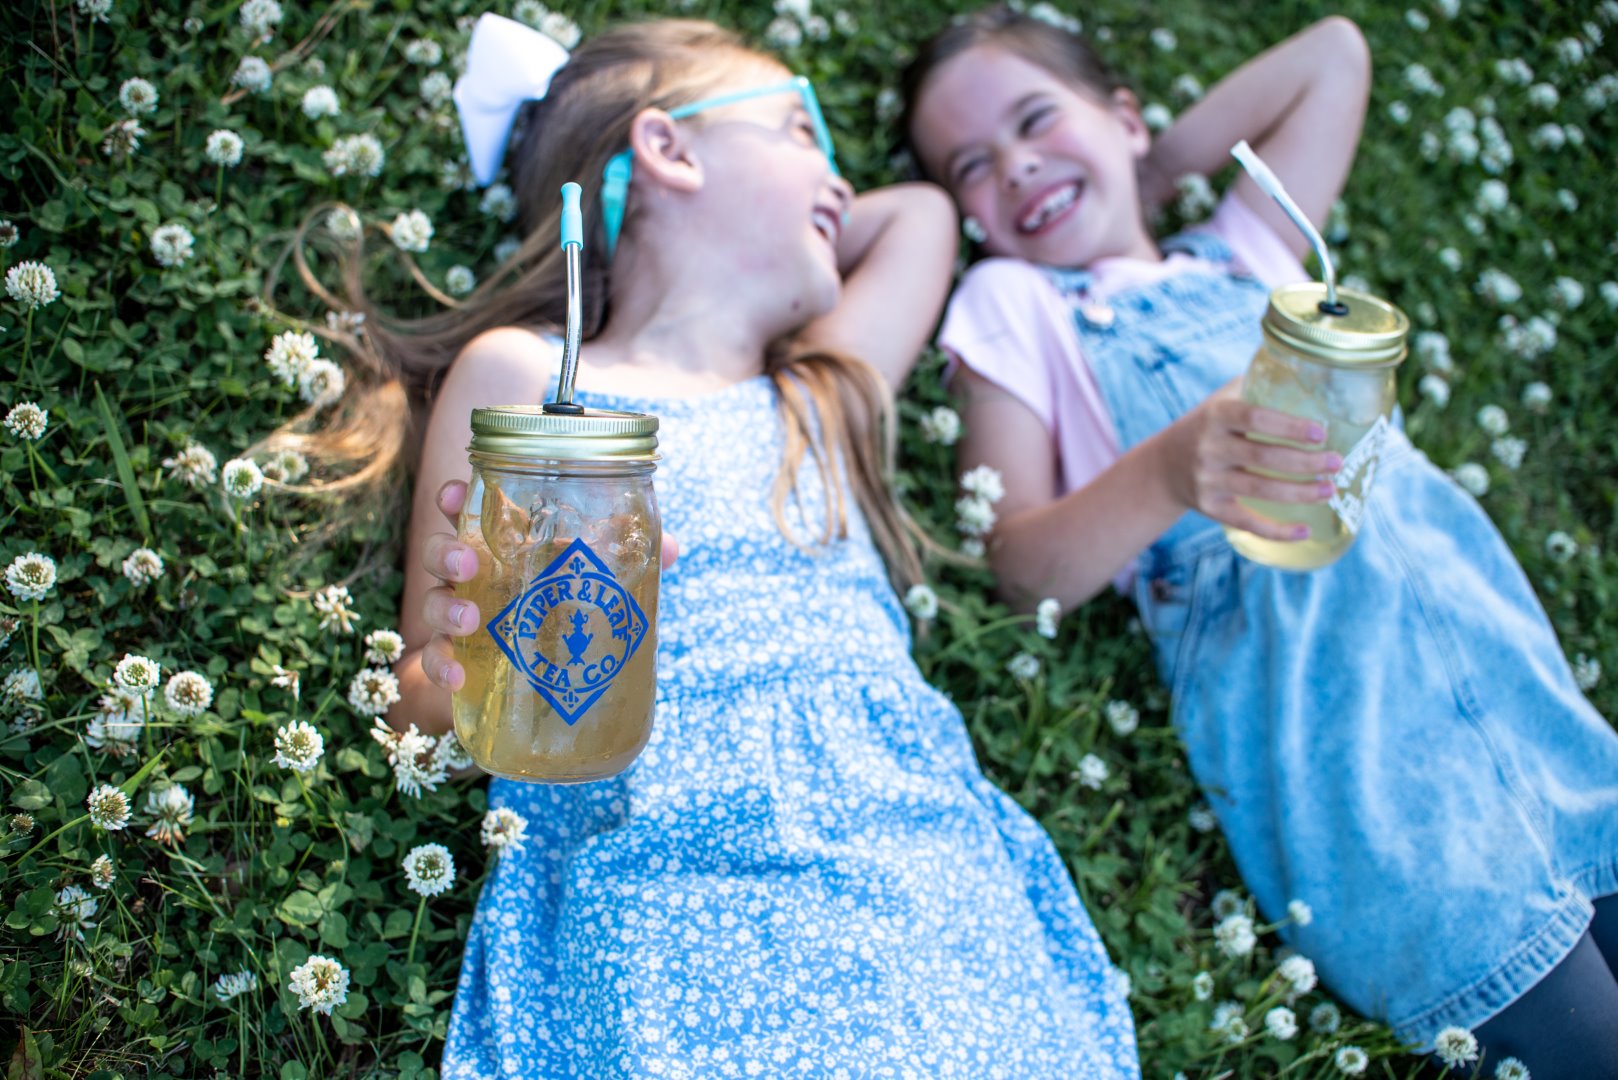 Two girls lounging in the grass with iced tea in Piper & Leaf Tea Co. Signature Mason Jars - Pint Size.